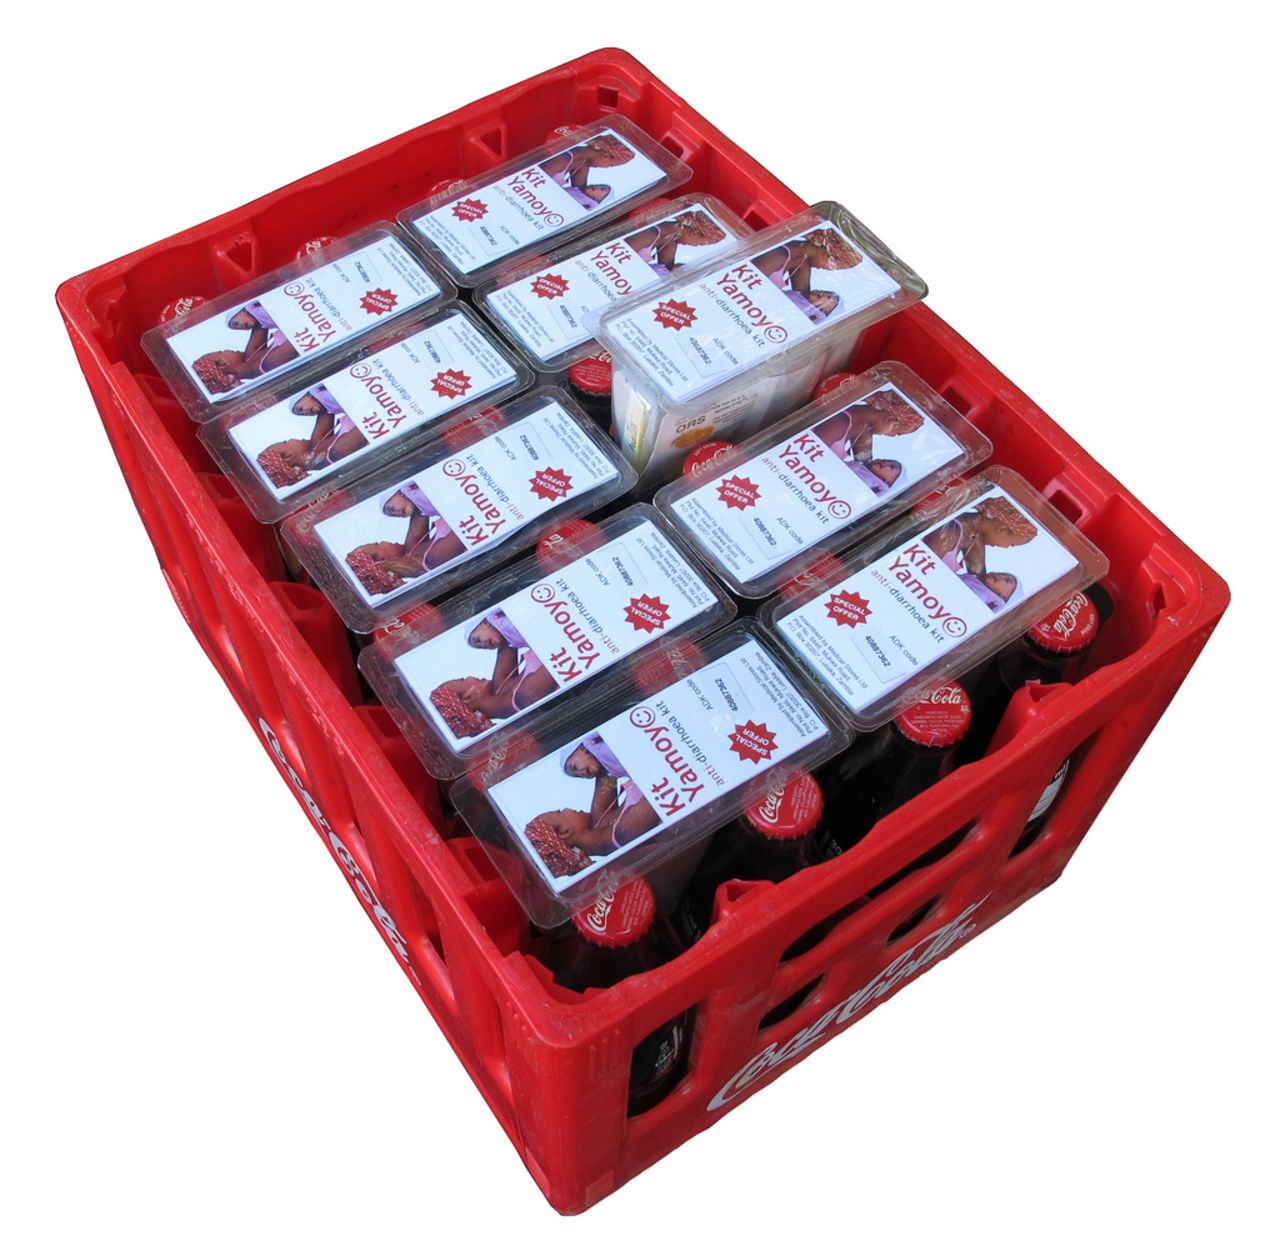 Ten packages of "Kit Yamoyo" anti-diarrhea kits fit easily into a single crate of cola.